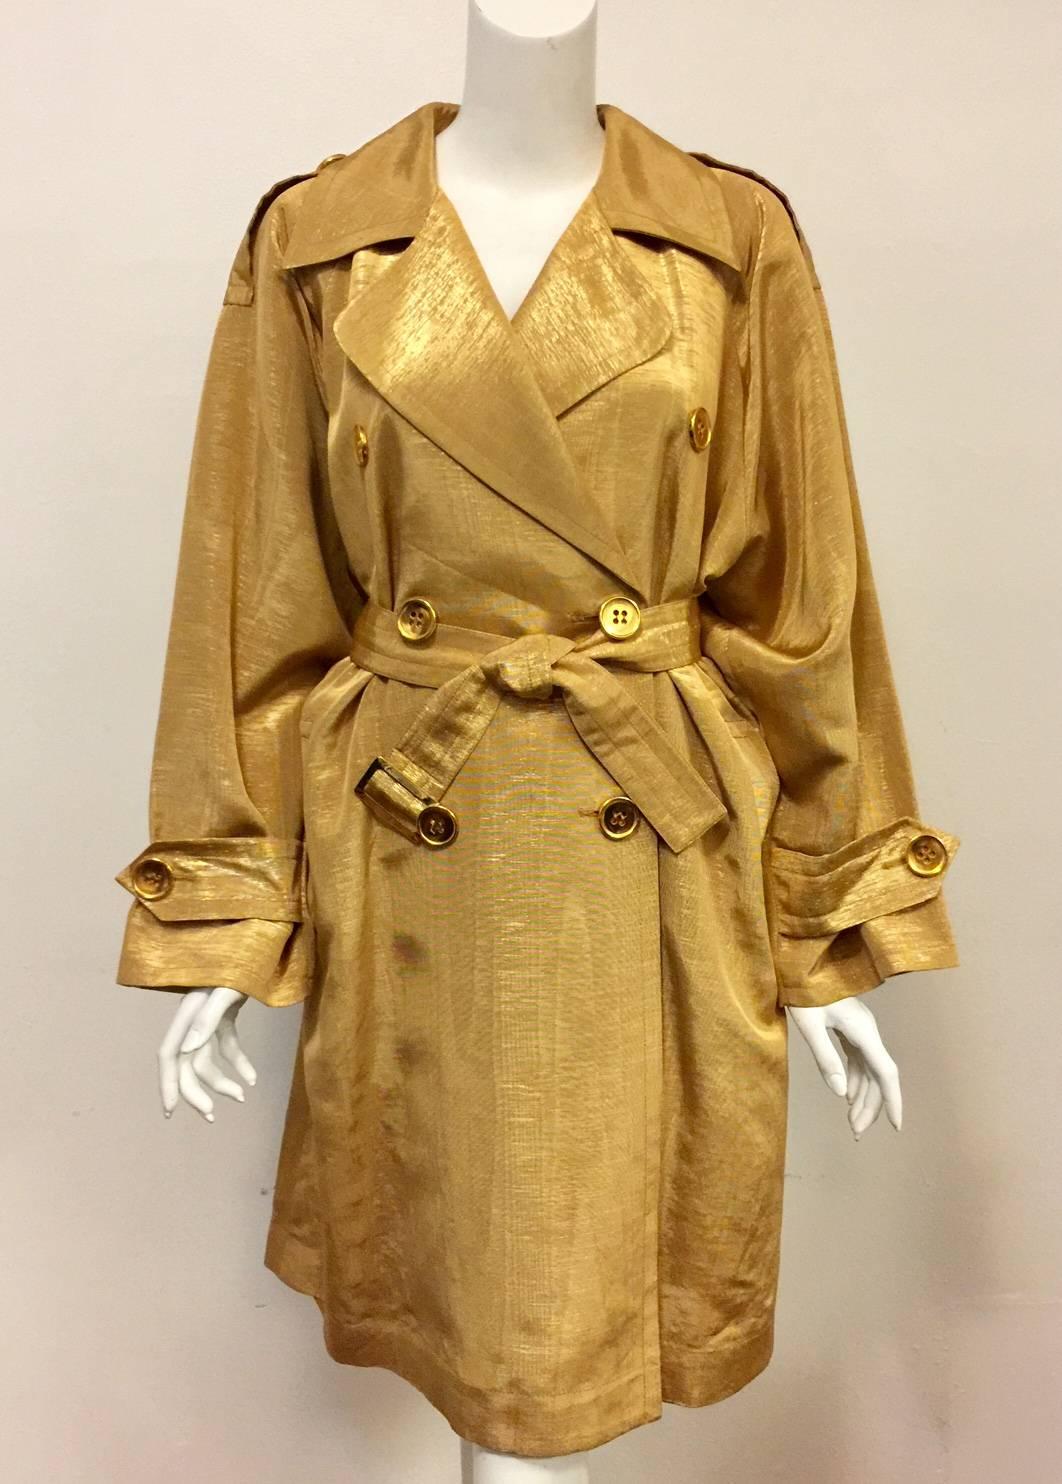 Vintage Metallic Gold Trench Coat illustrates why Yves Saint Laurent was considered The Sun-King of Couture, or merely 